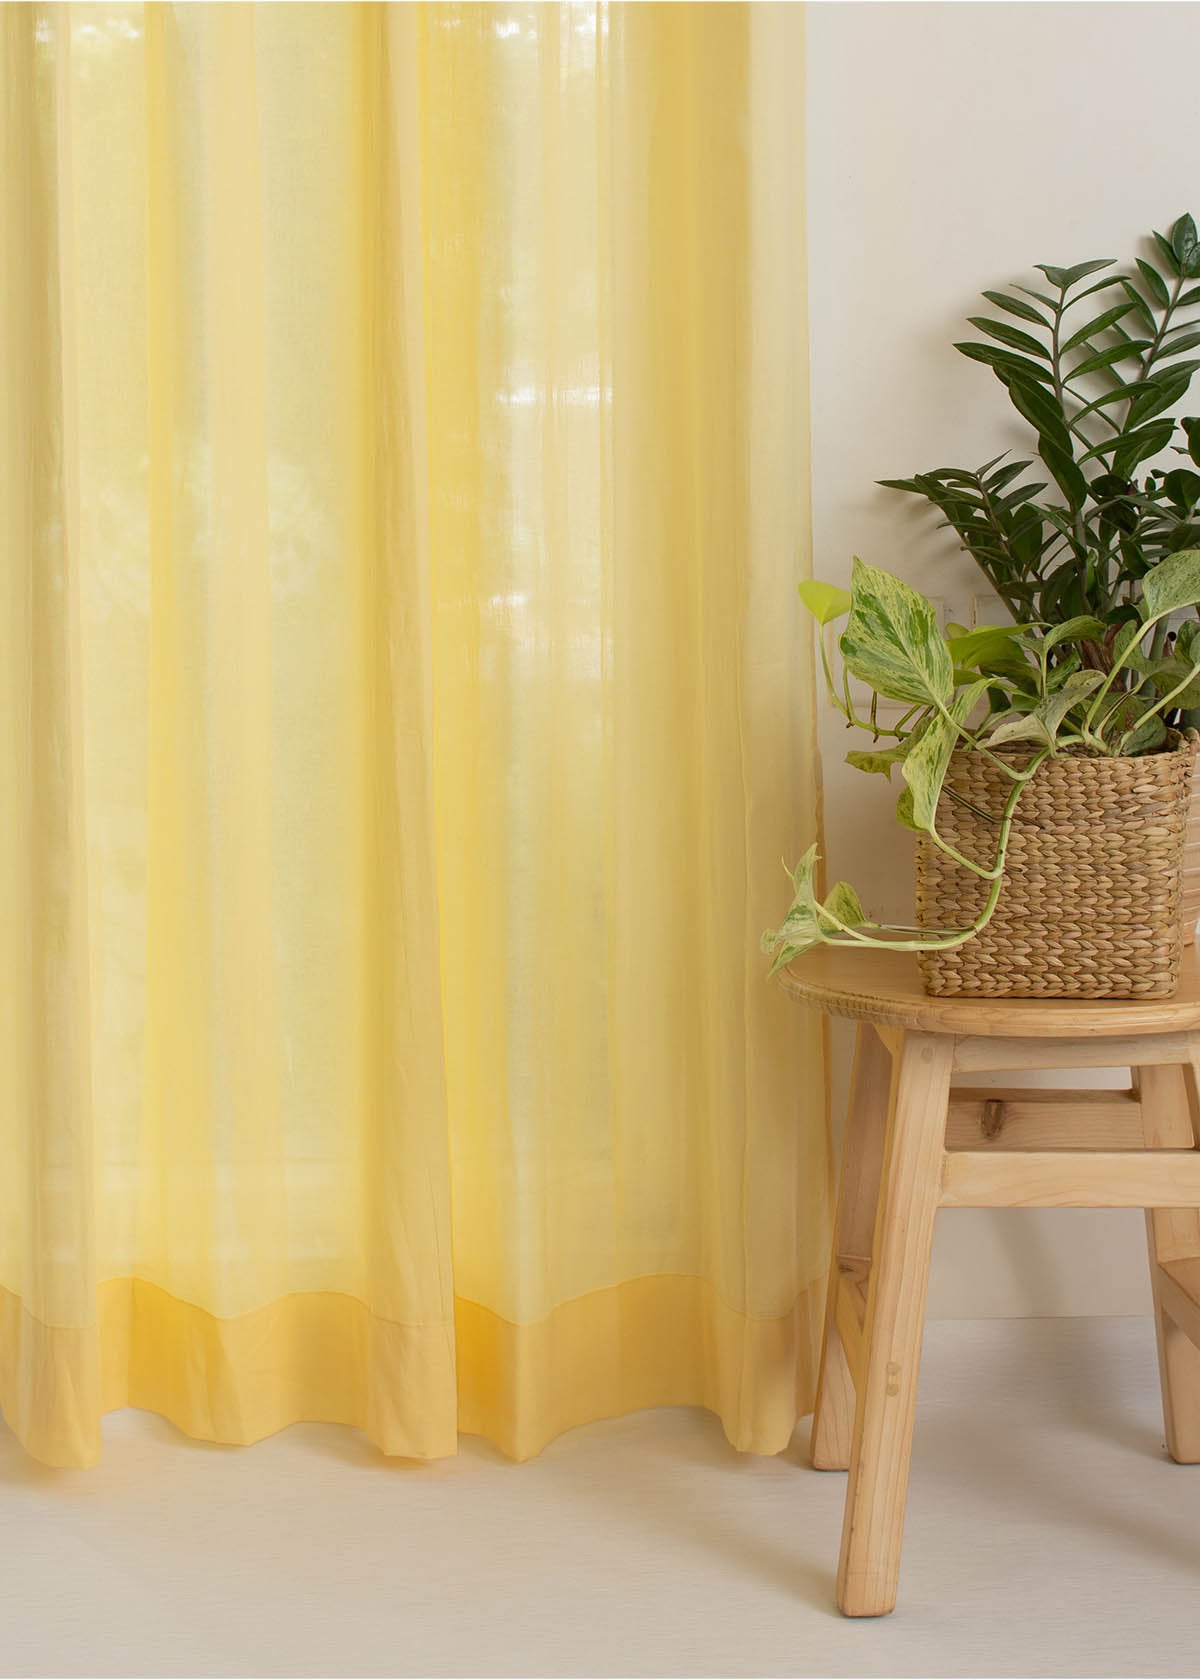 Solid Turmeric yellow sheer 100% cotton plain curtain for Living room & bedroom - Light filtering - Pack of 1